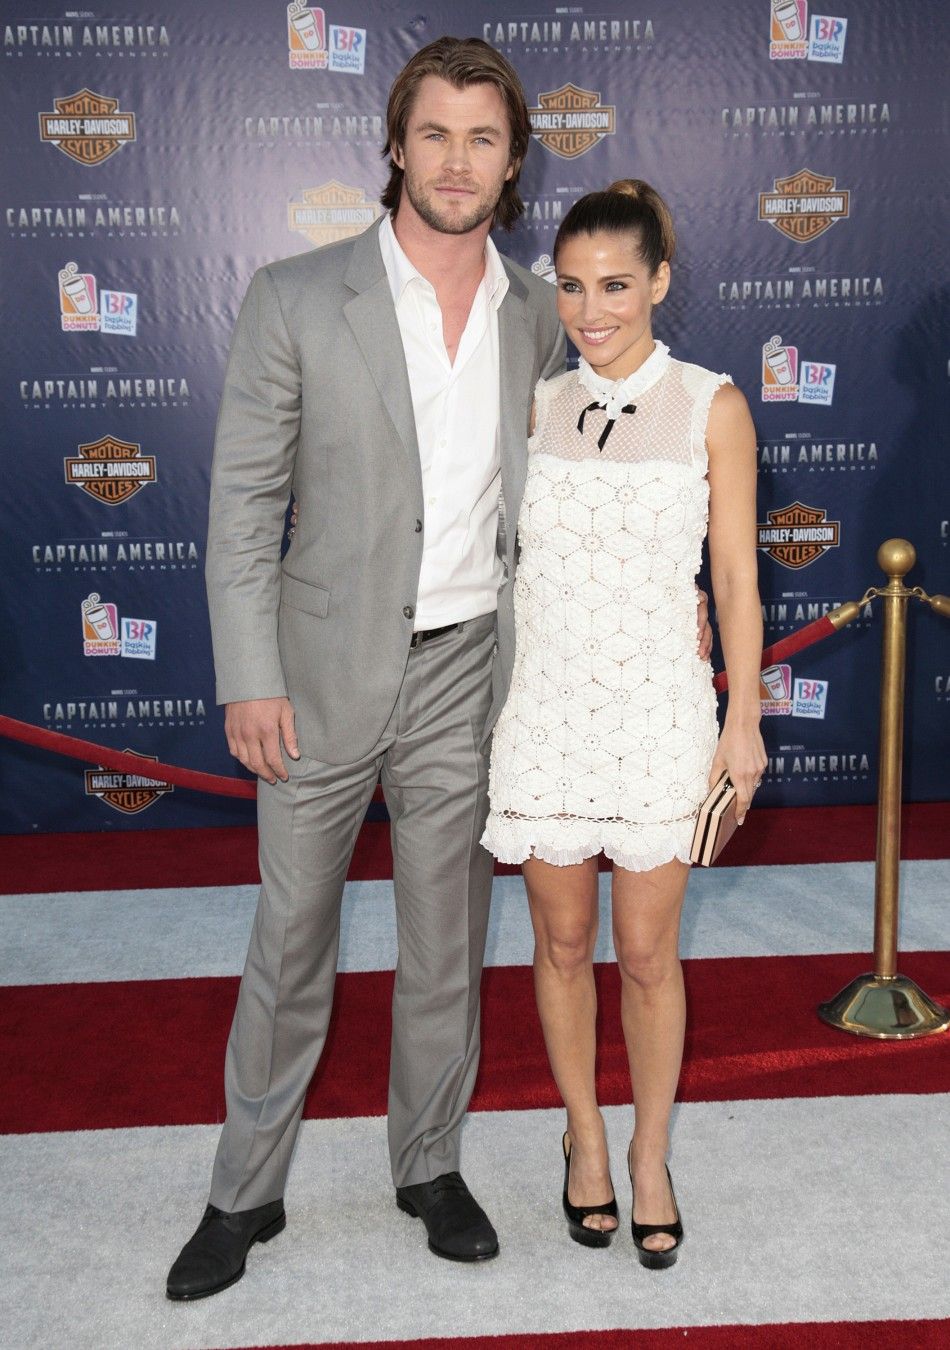 Actor Hemsworth and his wife pose as they arrive at the quotCaptain America The First Avengerquot film premiere in Hollywood